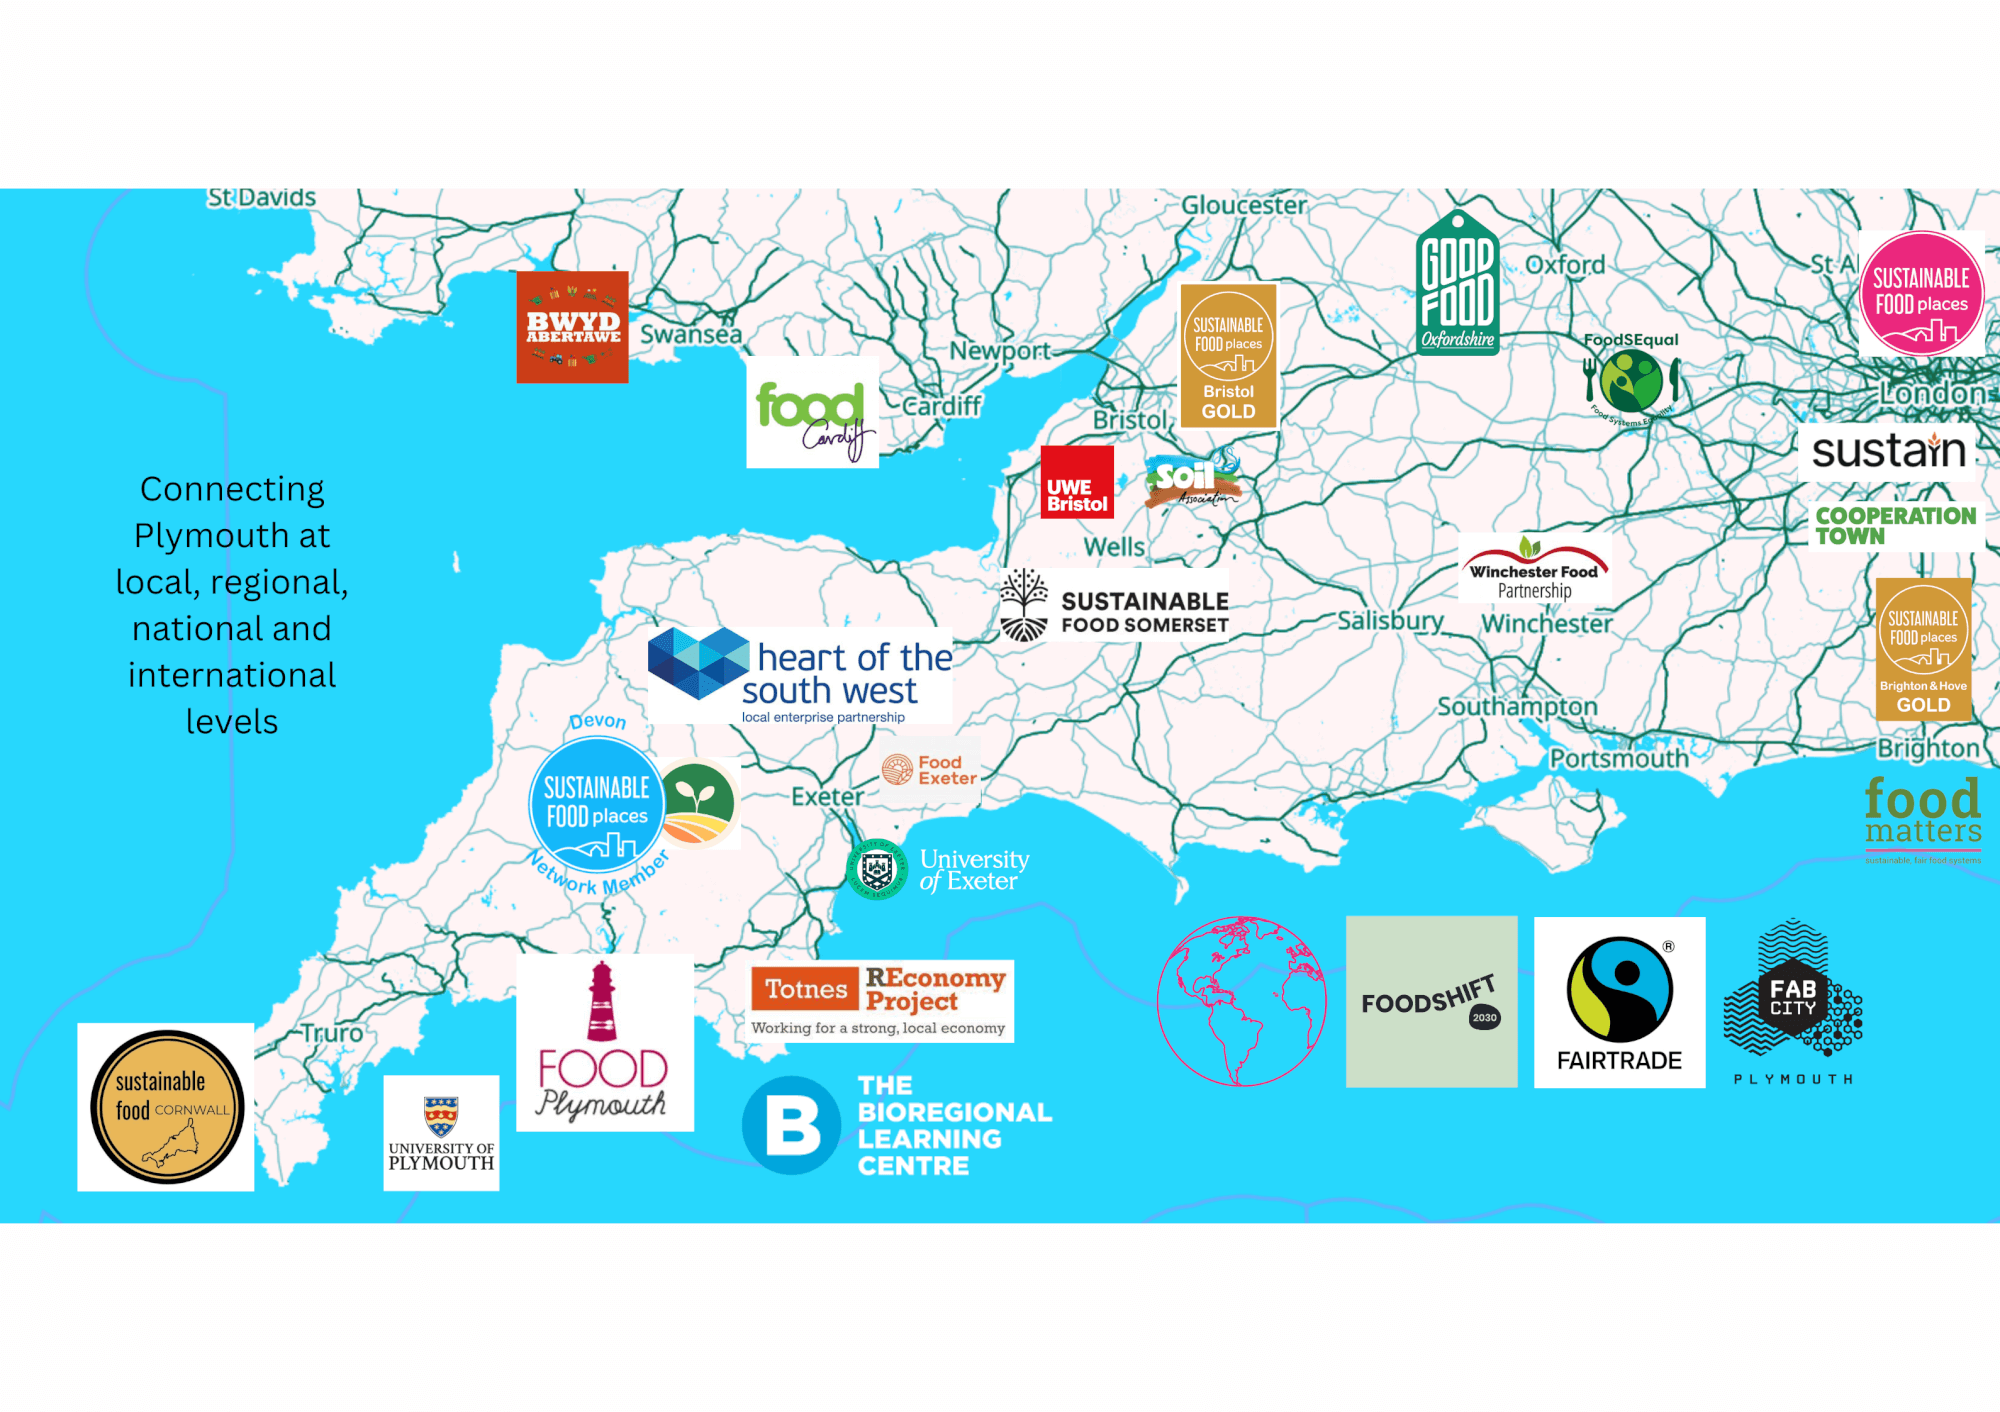 A diagram showing regional connections of Food Plymouth across the South West of England through to London